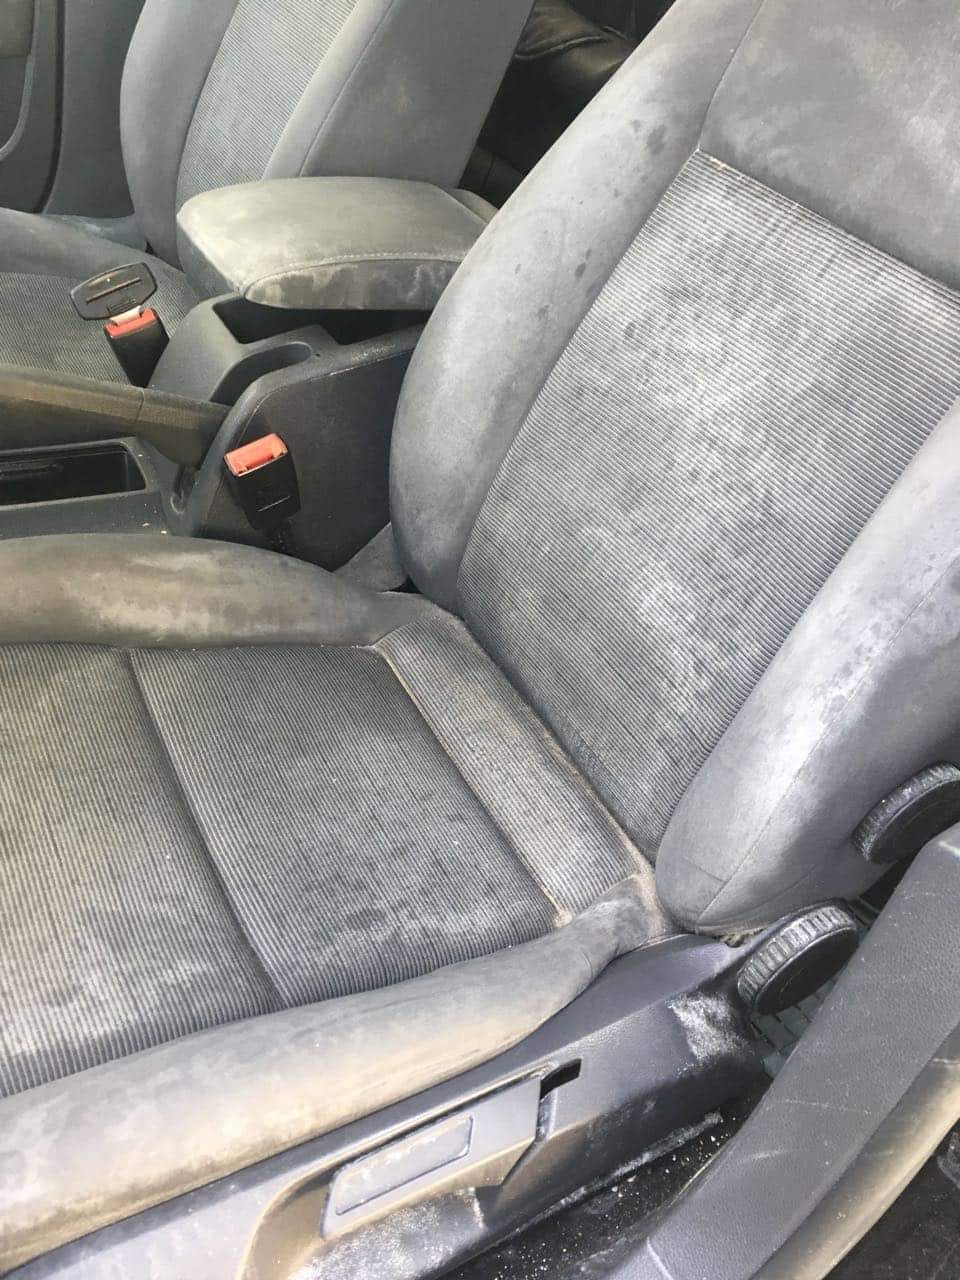 mold on the seats